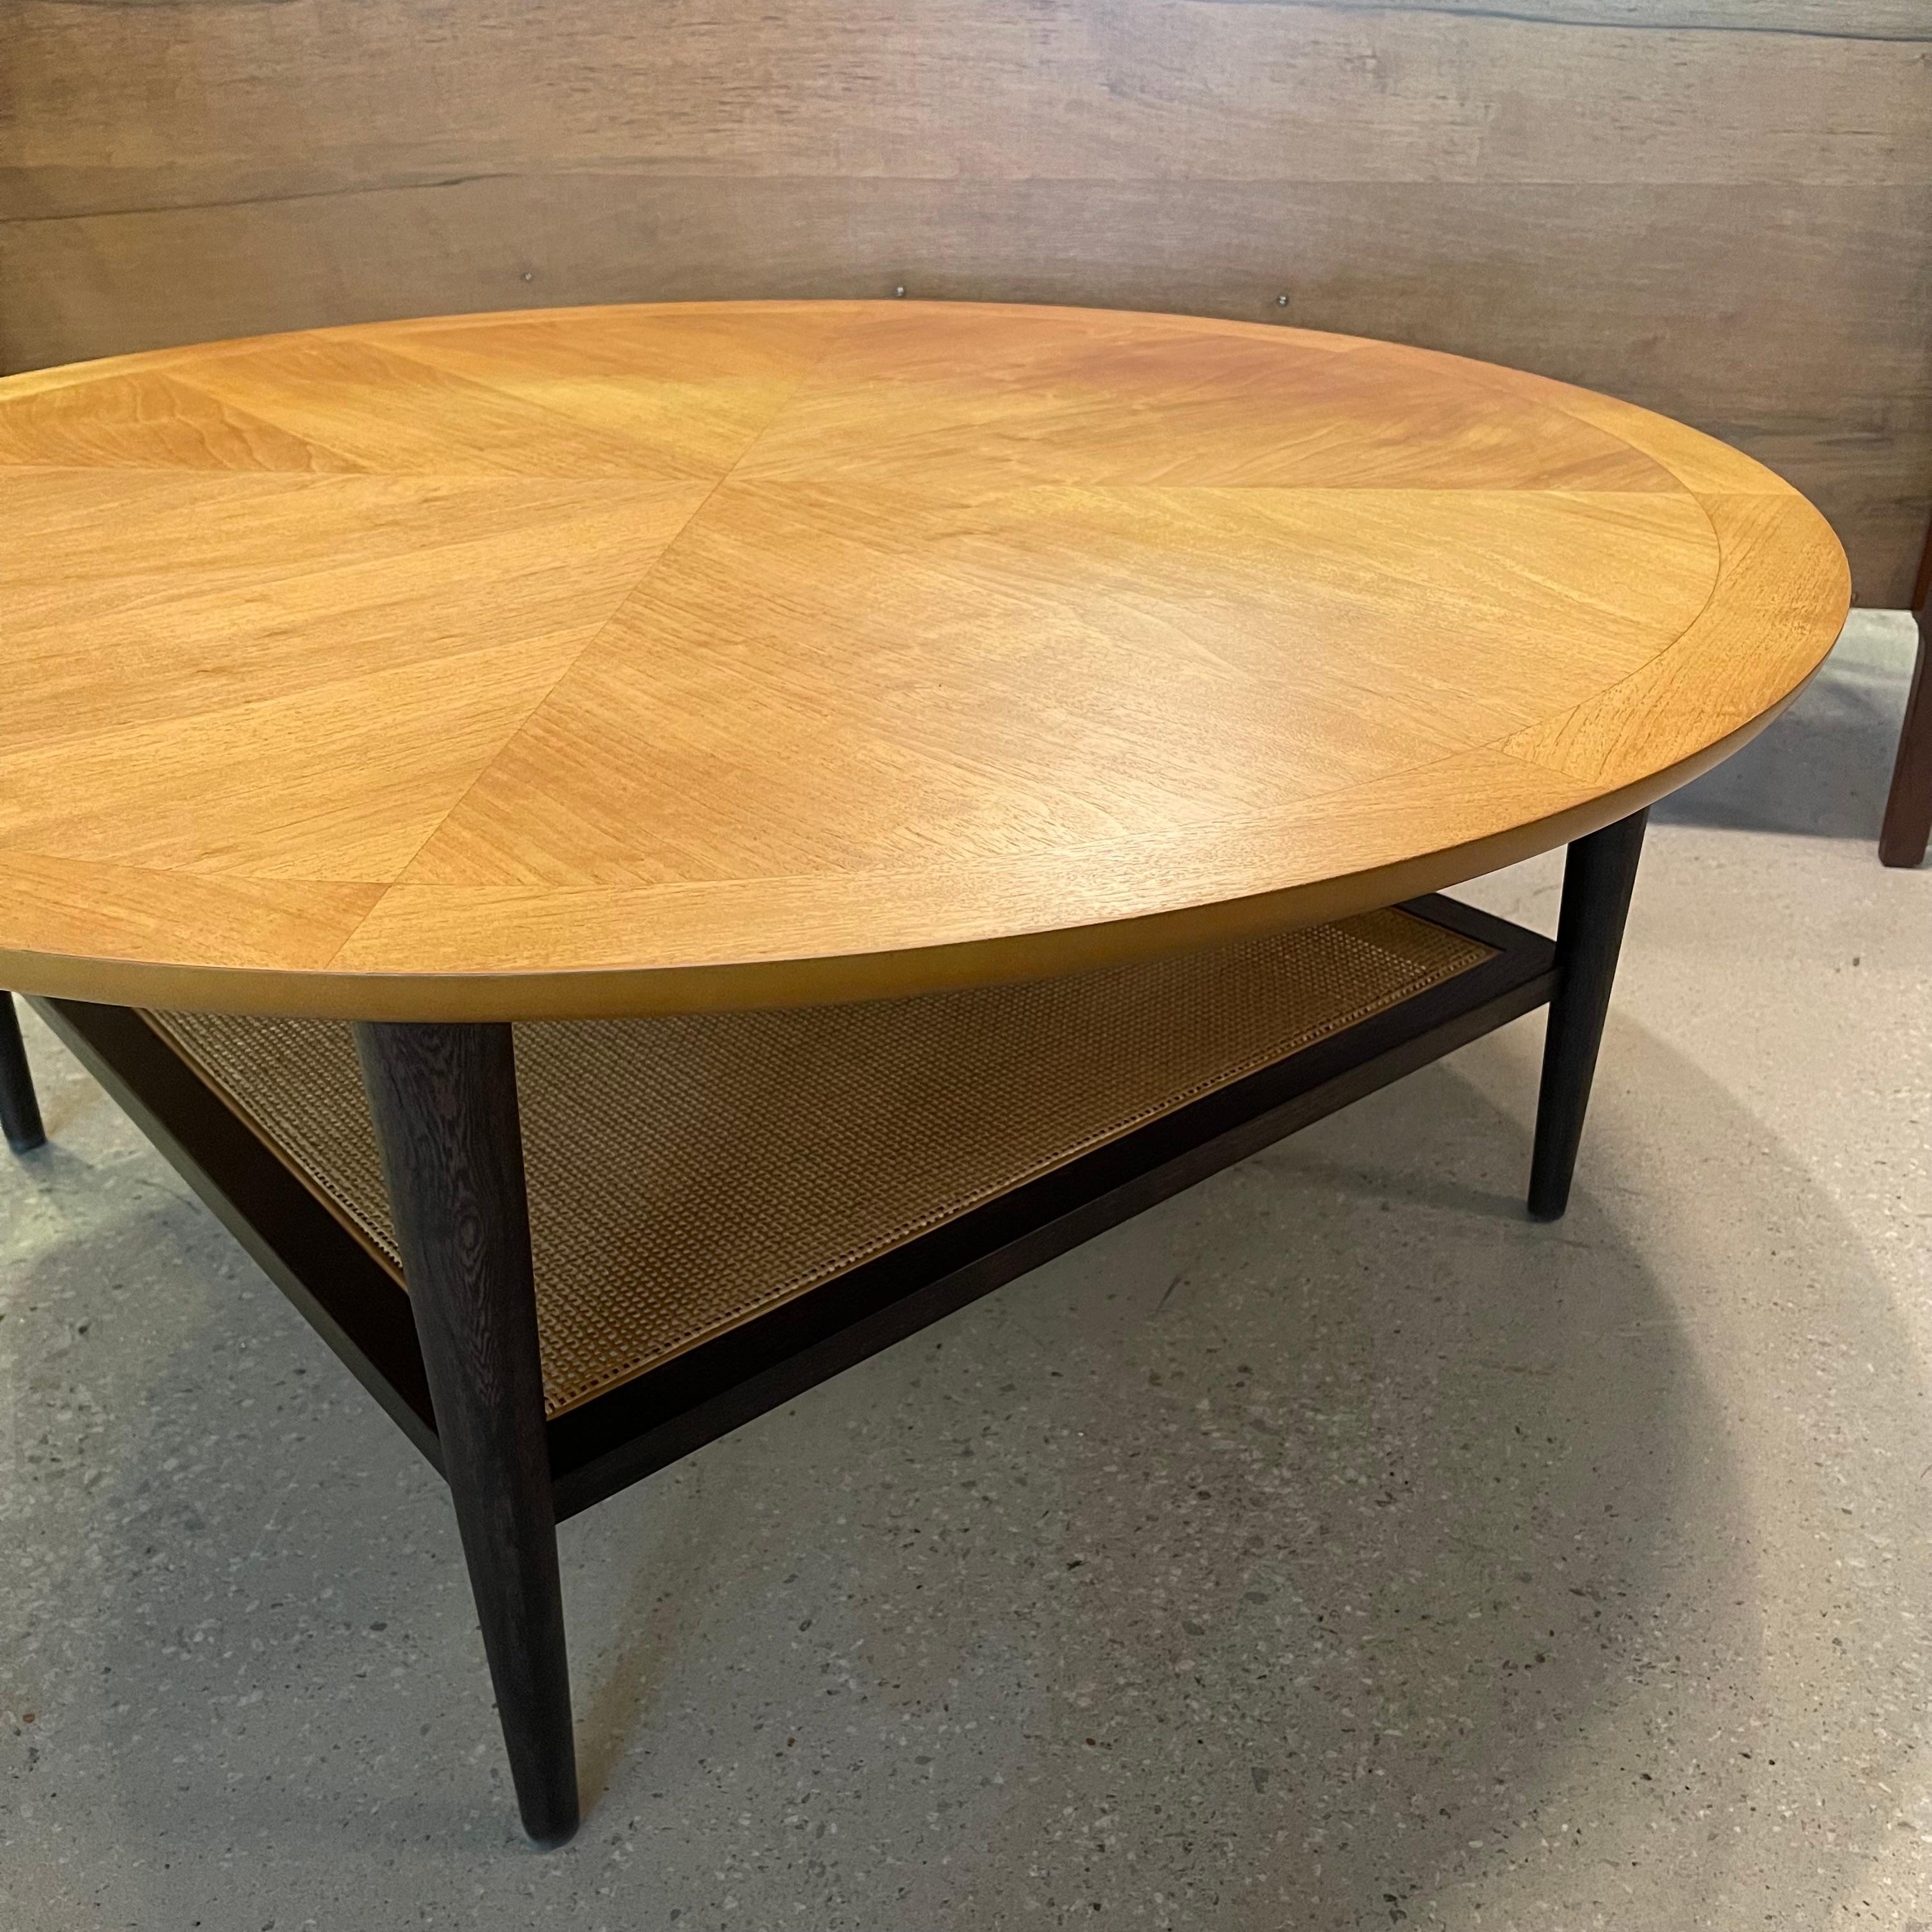 Mid-Century Modern Round Coffee Table By Lane Alta Vista In Good Condition For Sale In Brooklyn, NY